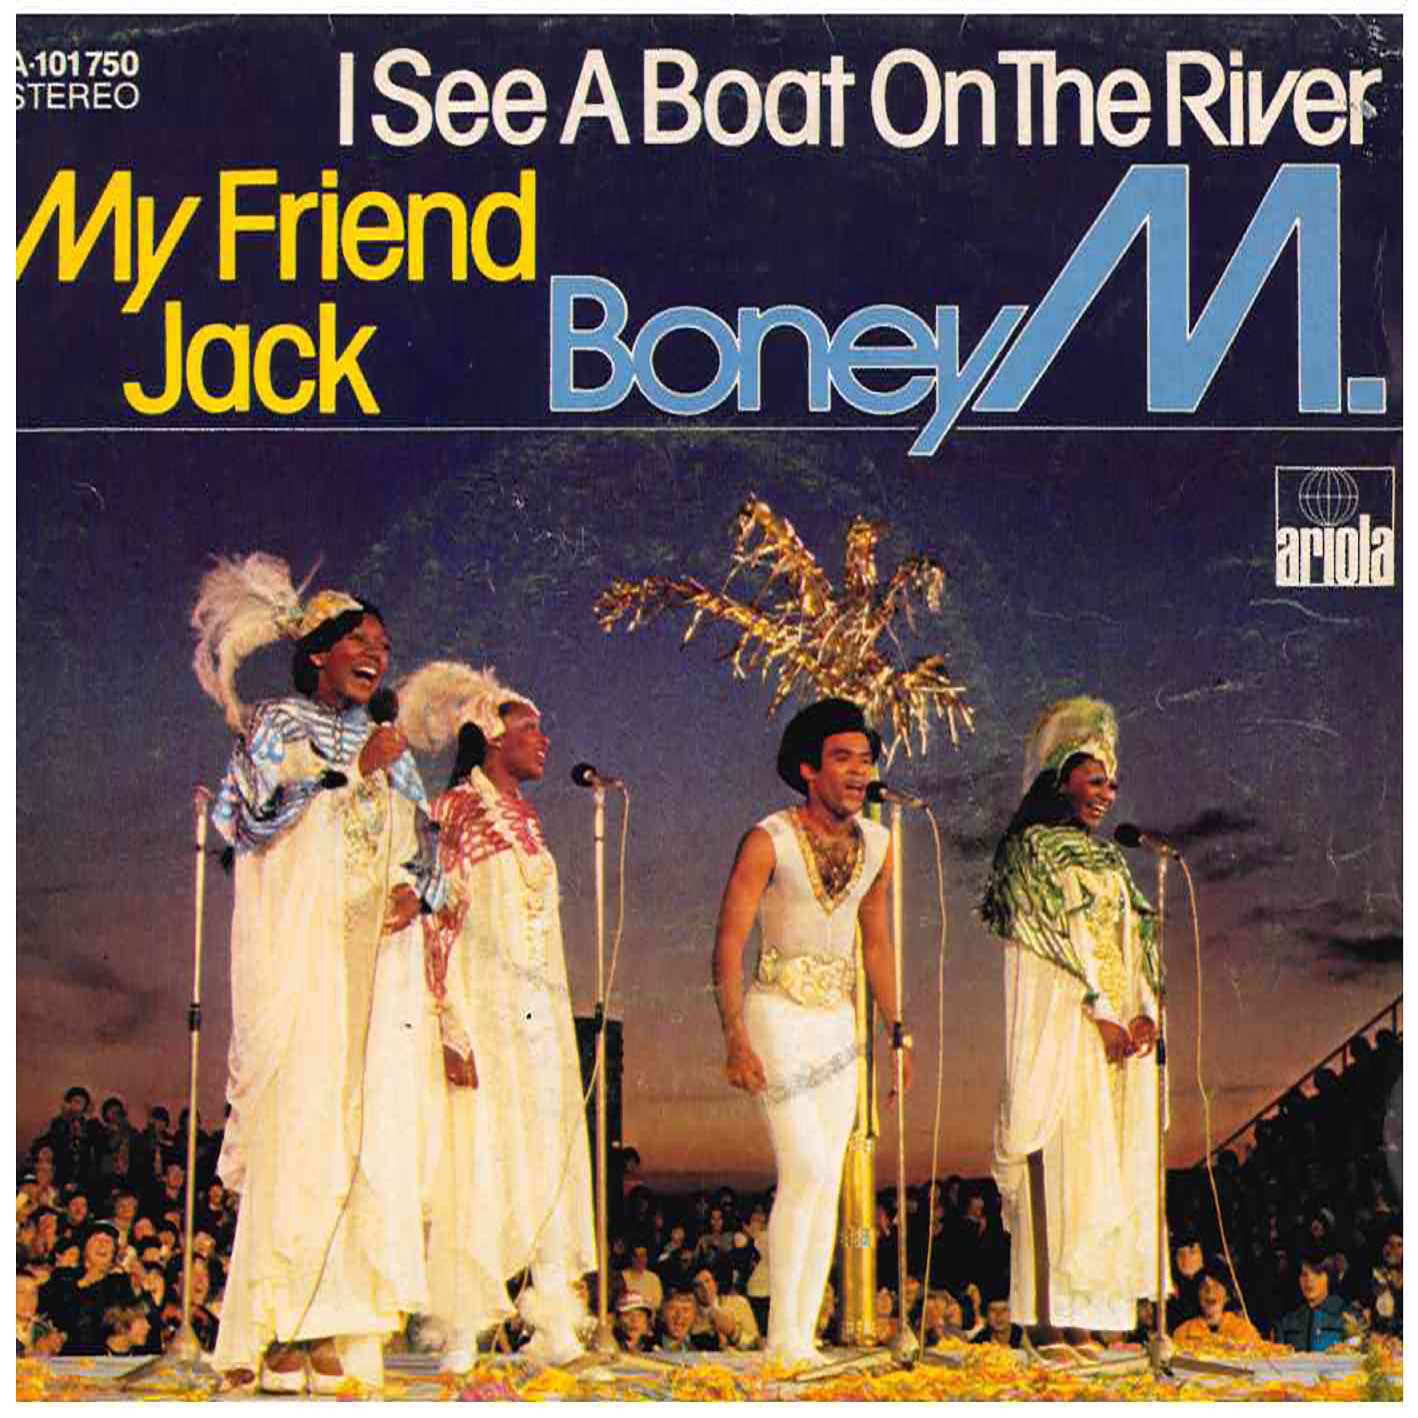 Boney M. – I See A Boat On The River / My Friend Jack